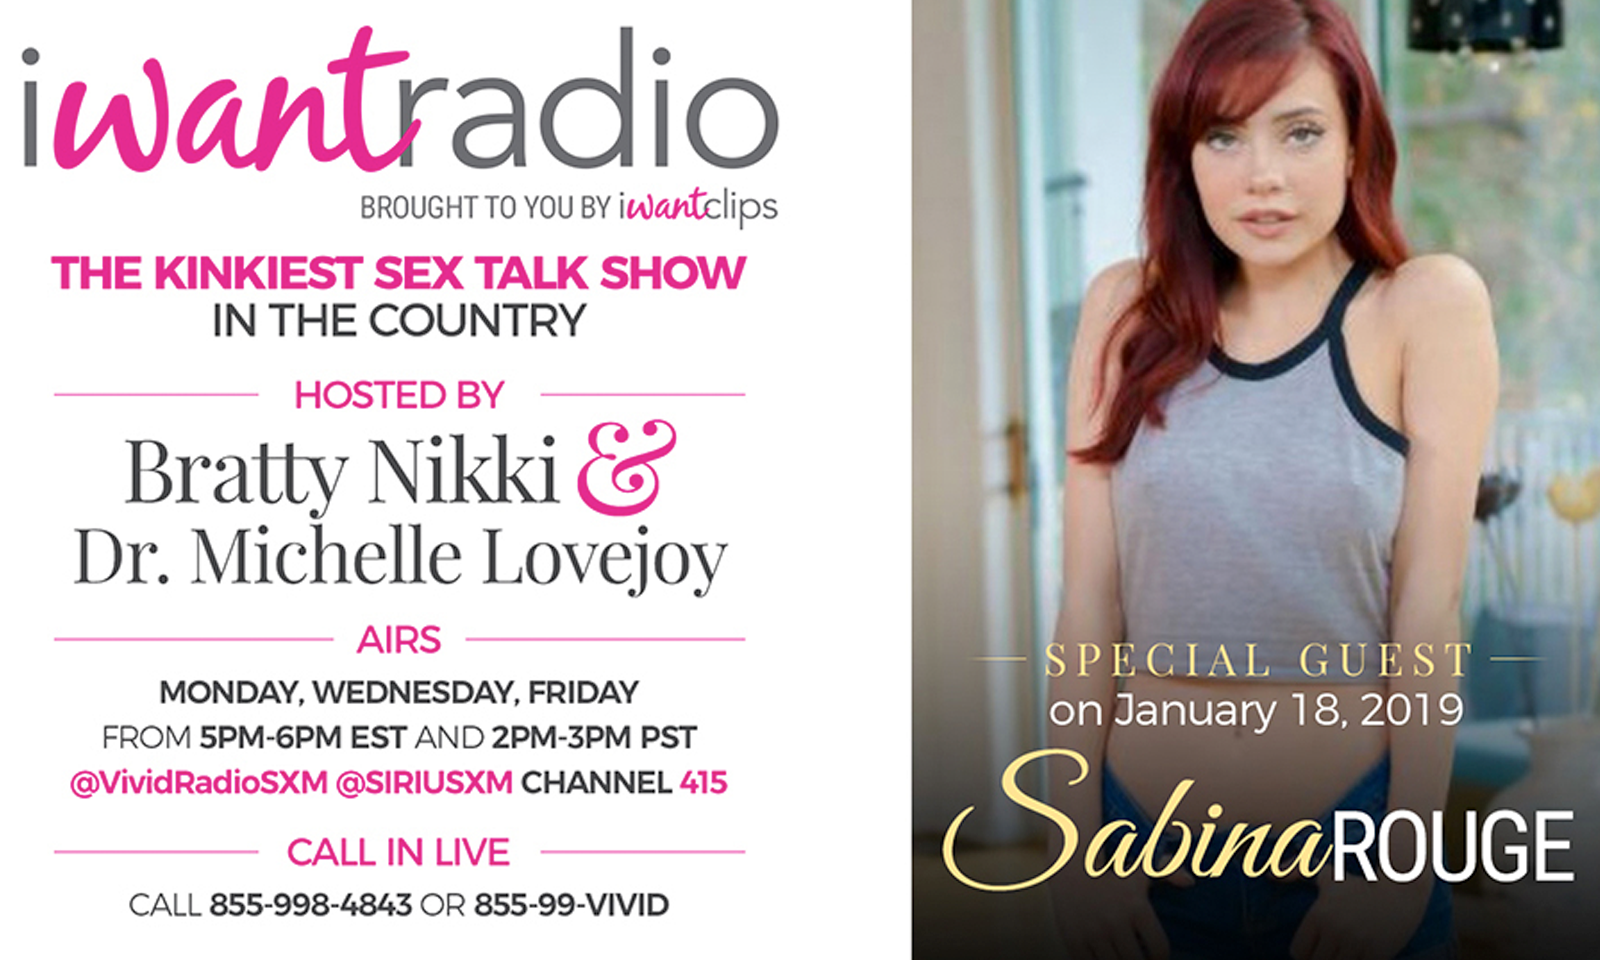 Newcomer Sabina Rouge Featured on iWantRadio